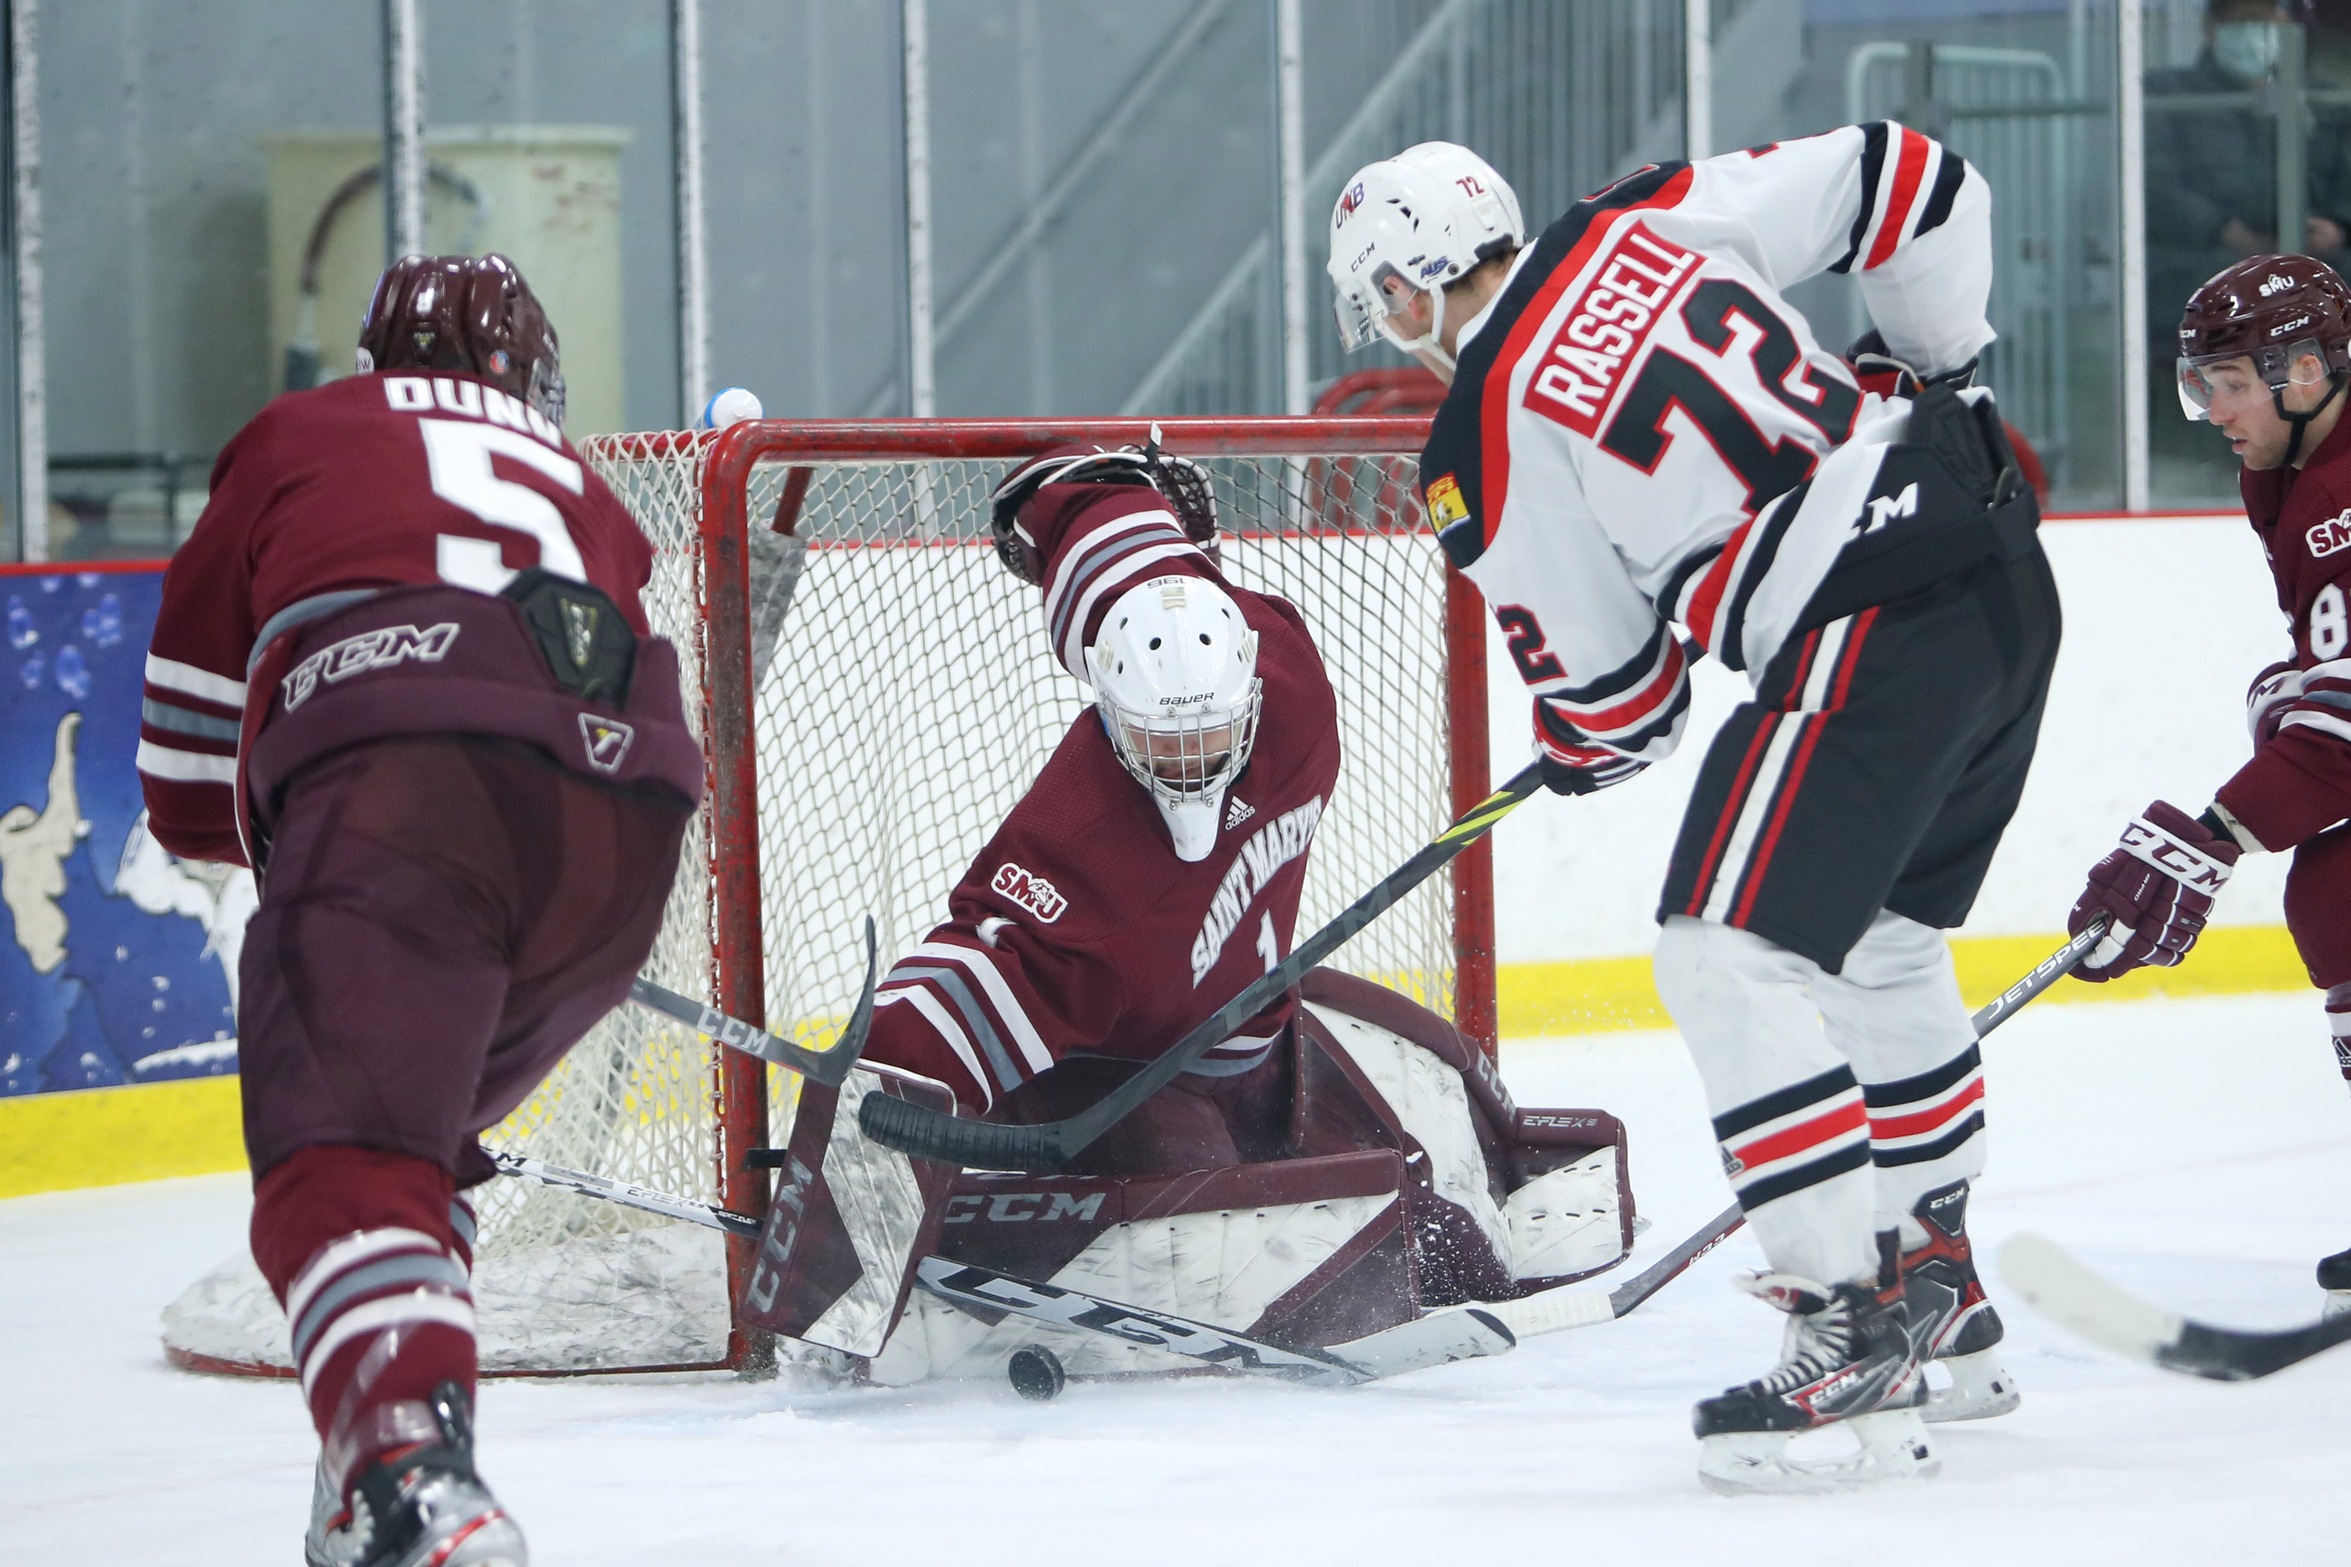 Huskies goaltender Justin Sumarah makes a save on UNB REDS Mark Rassell, one of Sumarah's 47 saves in a thrilling 4-3 win over the top ranked REDS on Saturday, Feb. 26, 2022 at the Dauphinee Centre in Halifax.